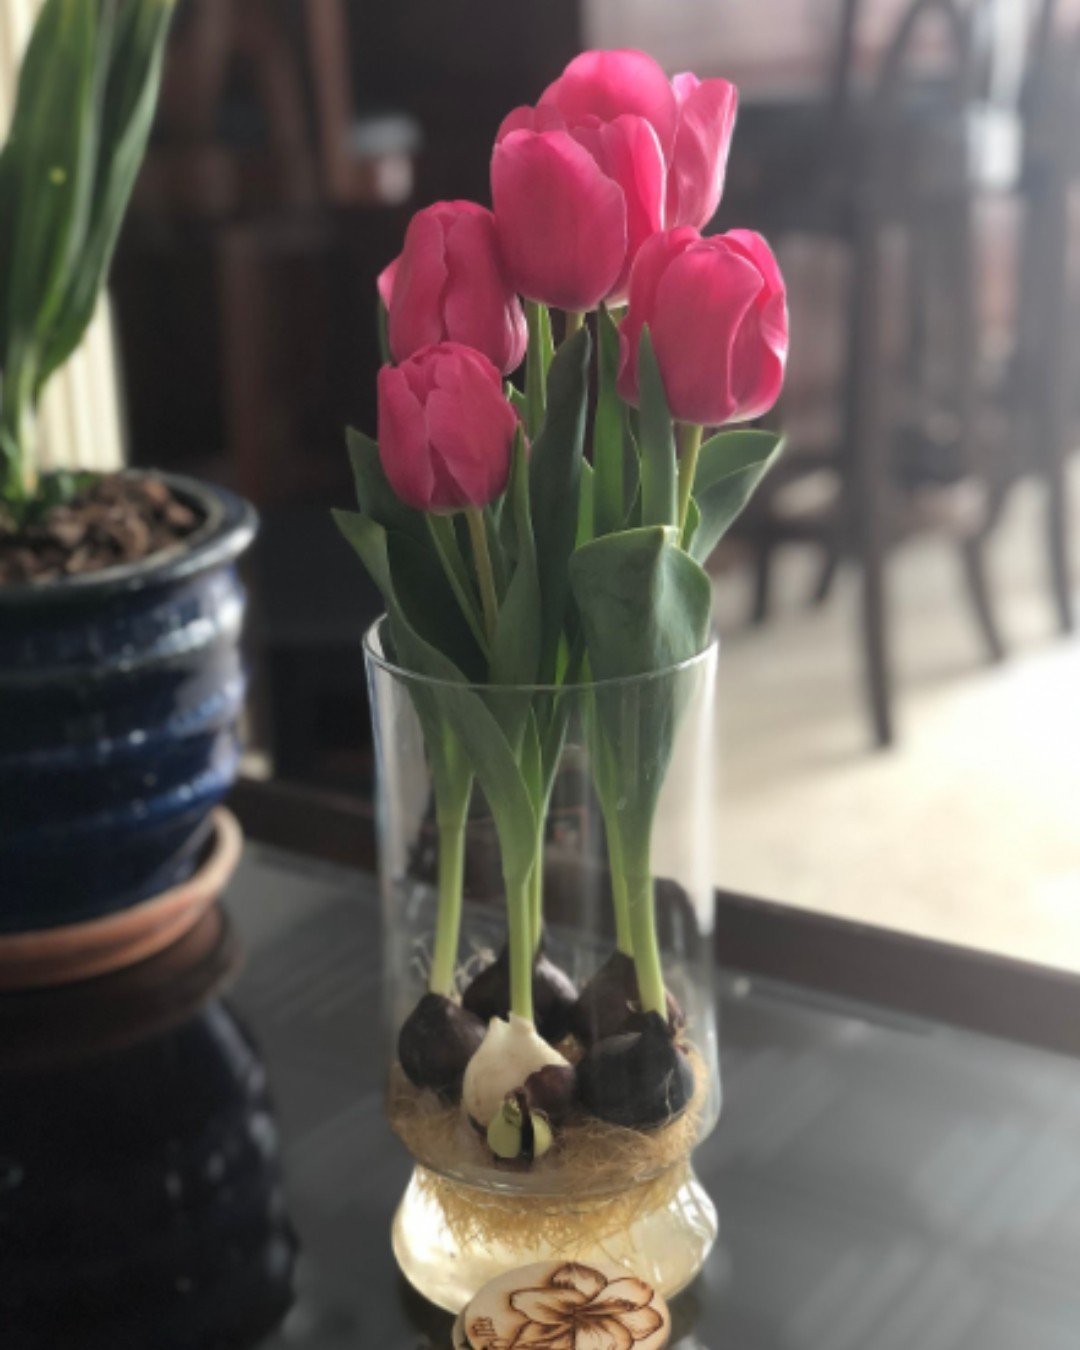 Top Tip Tuesday 🌷: Remember when refilling the water of your tulip vases that only the roots should be submerged but leave the bulbs themselves dry. 💧 This will prevent early decaying of the bulbs.
.
.
.
.
.
#Tulips #PlantCare #PlantLove #Gardening